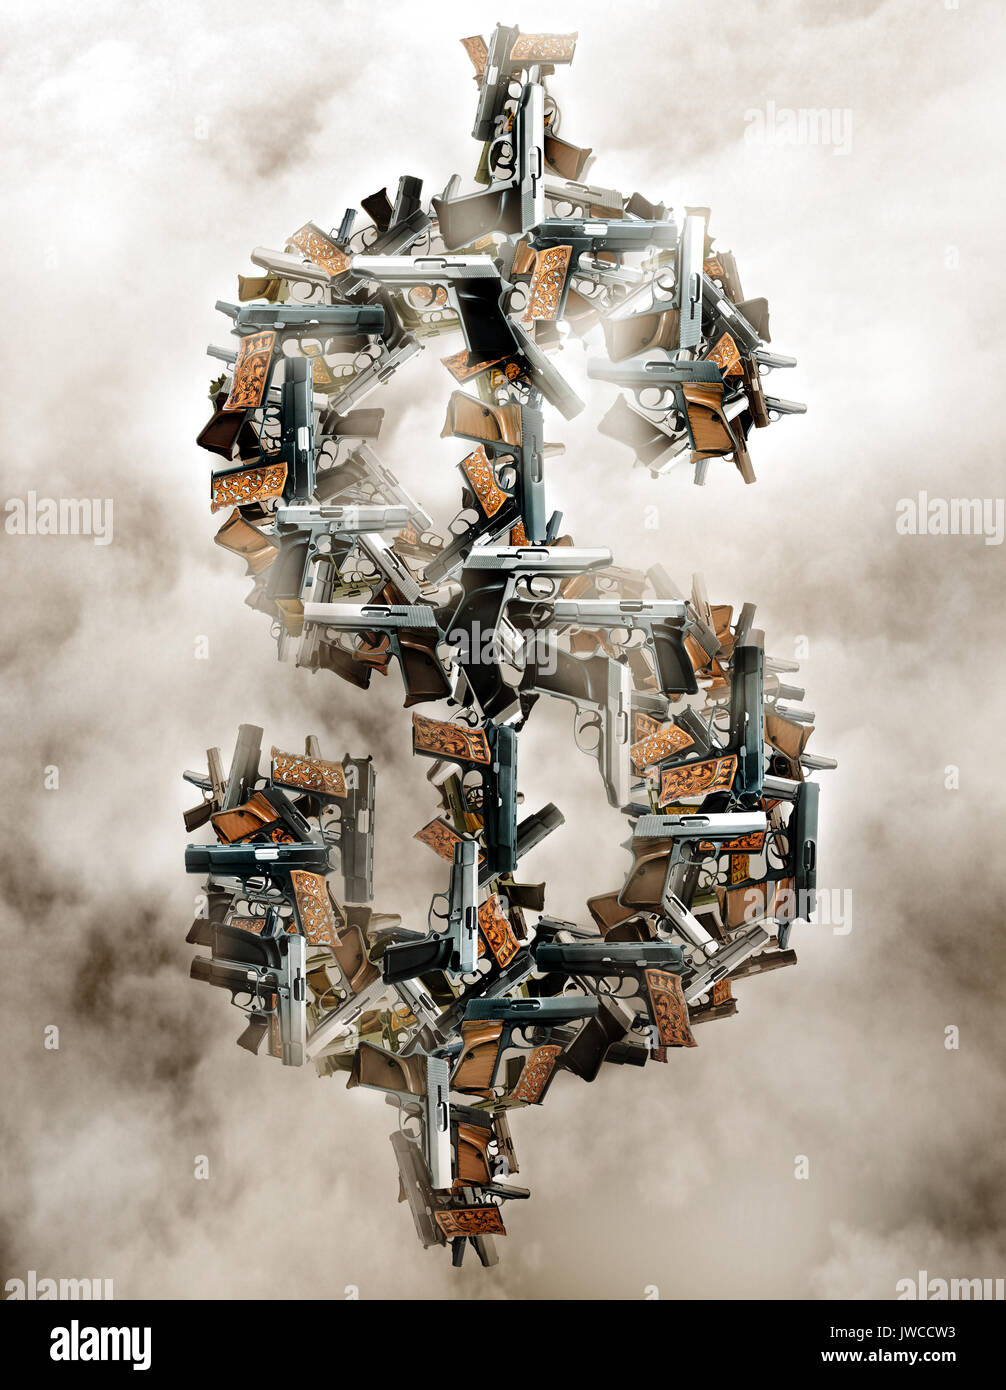 conceptual image of dollar sign with guns Stock Photo